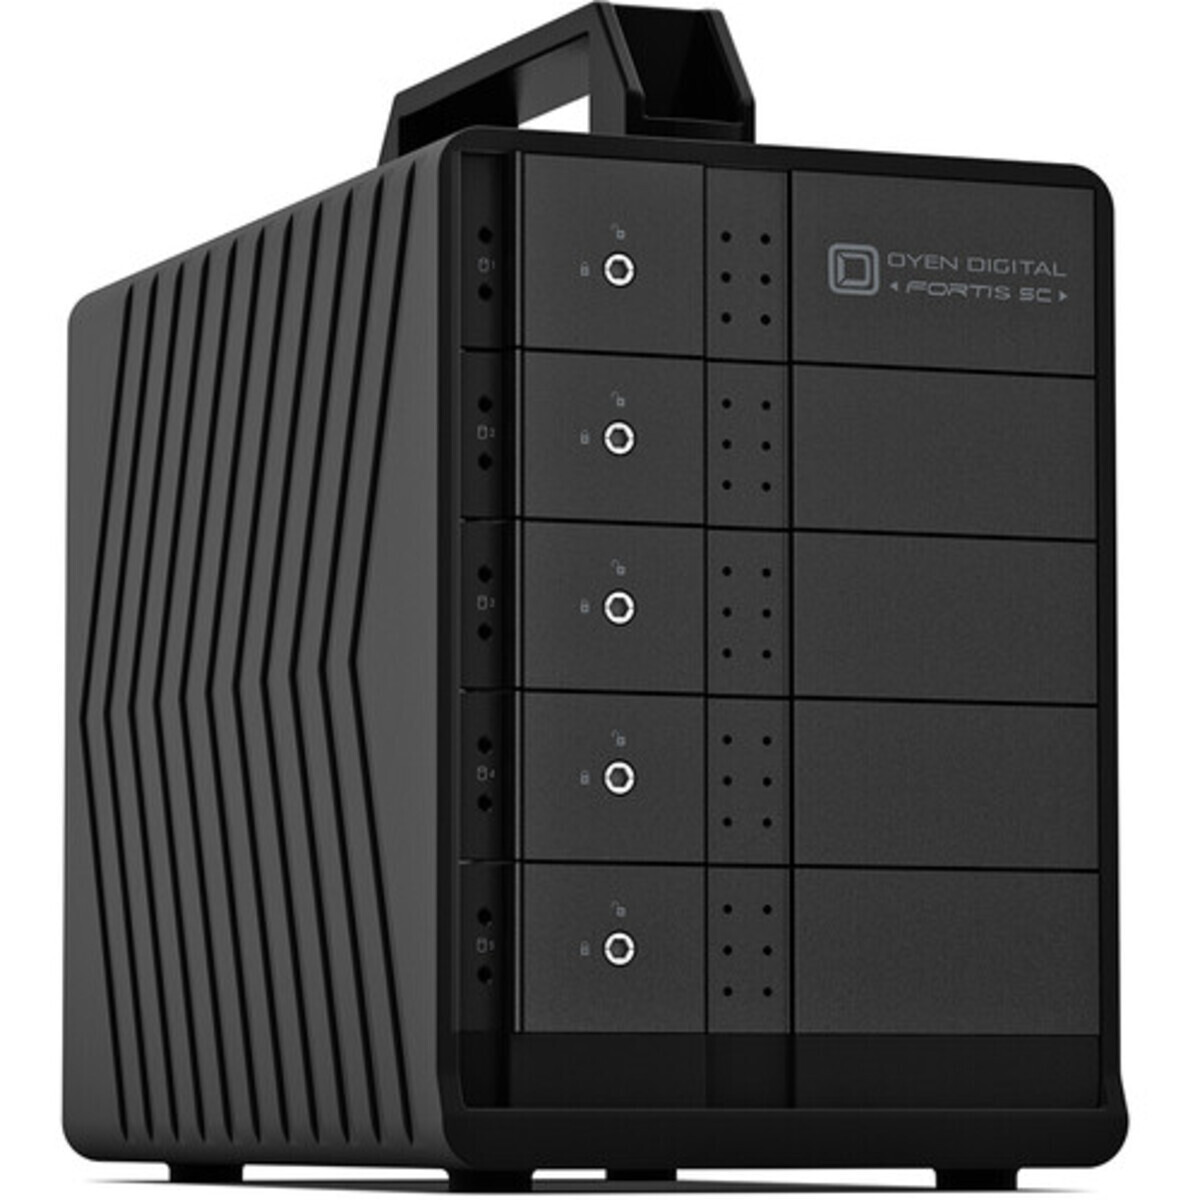 OYEN Fortis 5C 10tb 5-Bay Desktop Multimedia / Power User / Business DAS - Direct Attached Storage Device 5x2tb Western Digital Red Pro WD2002FFSX 3.5 7200rpm SATA 6Gb/s HDD NAS Class Drives Installed - Burn-In Tested Fortis 5C